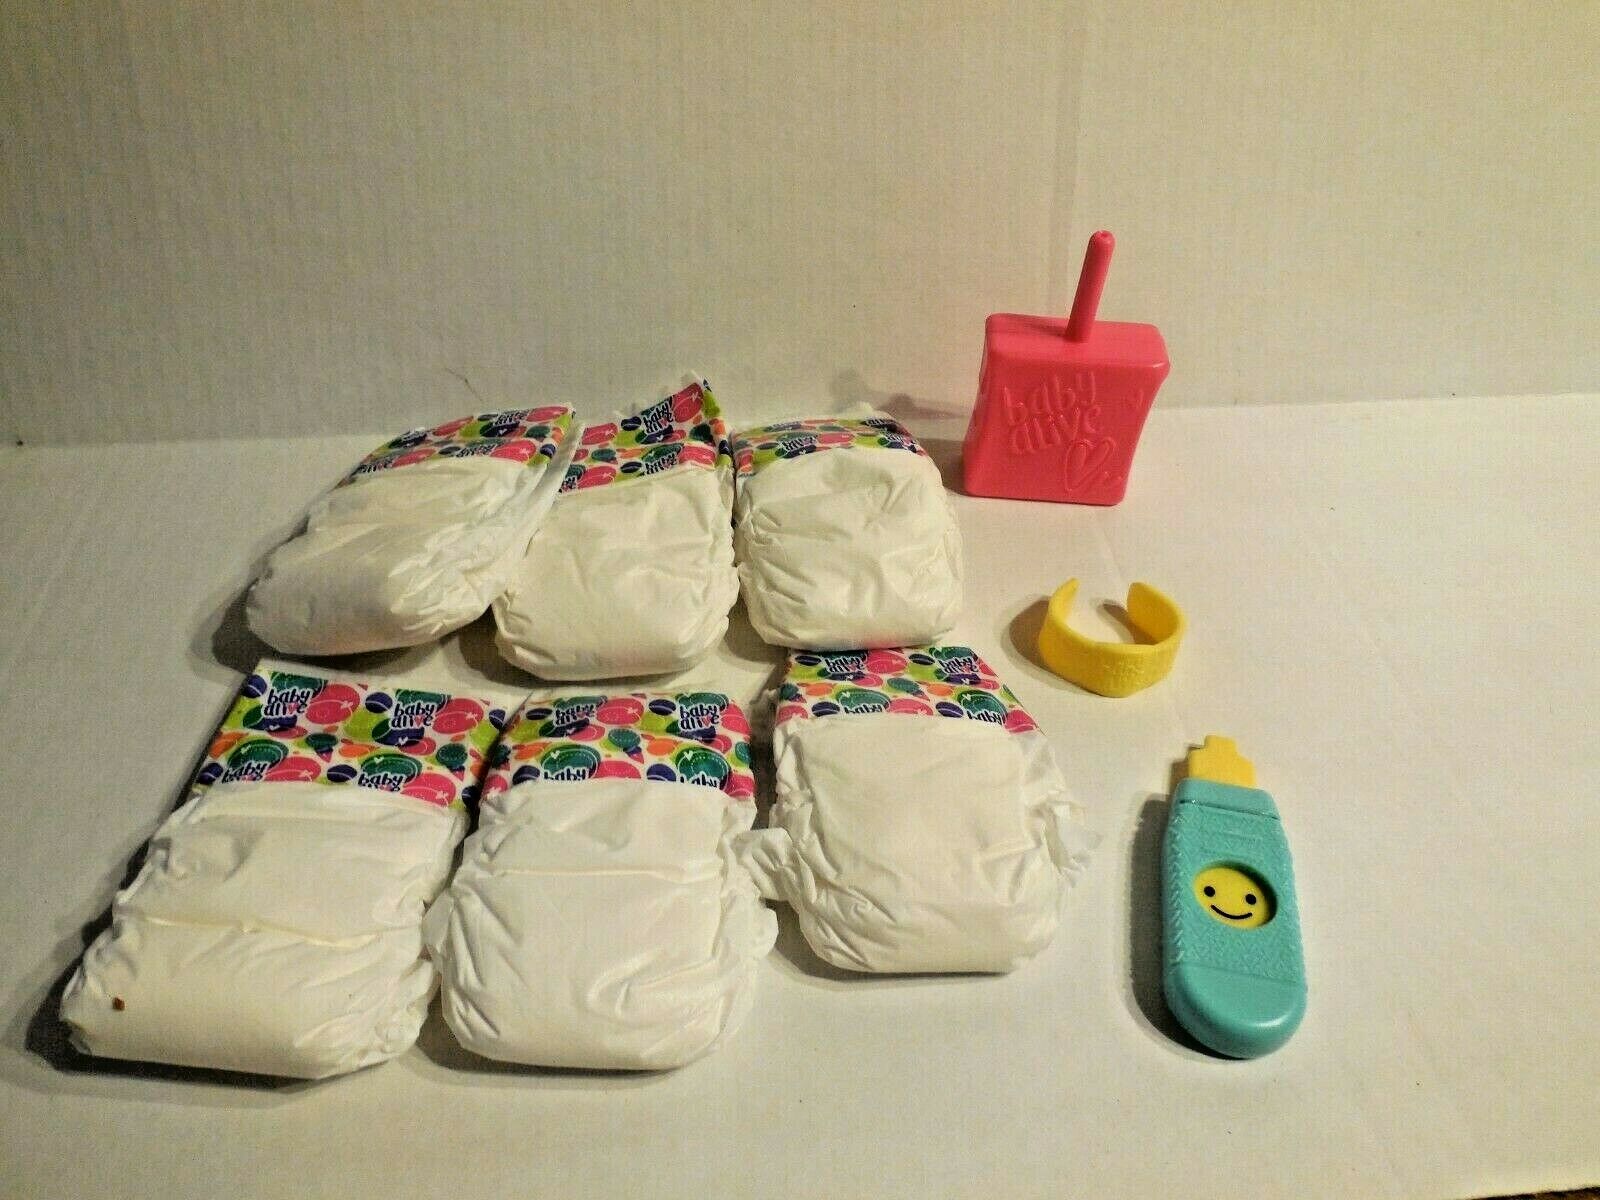 Hasbro Baby Alive Accessory Lot Diapers, Thermometer, Band Aid Juice Box